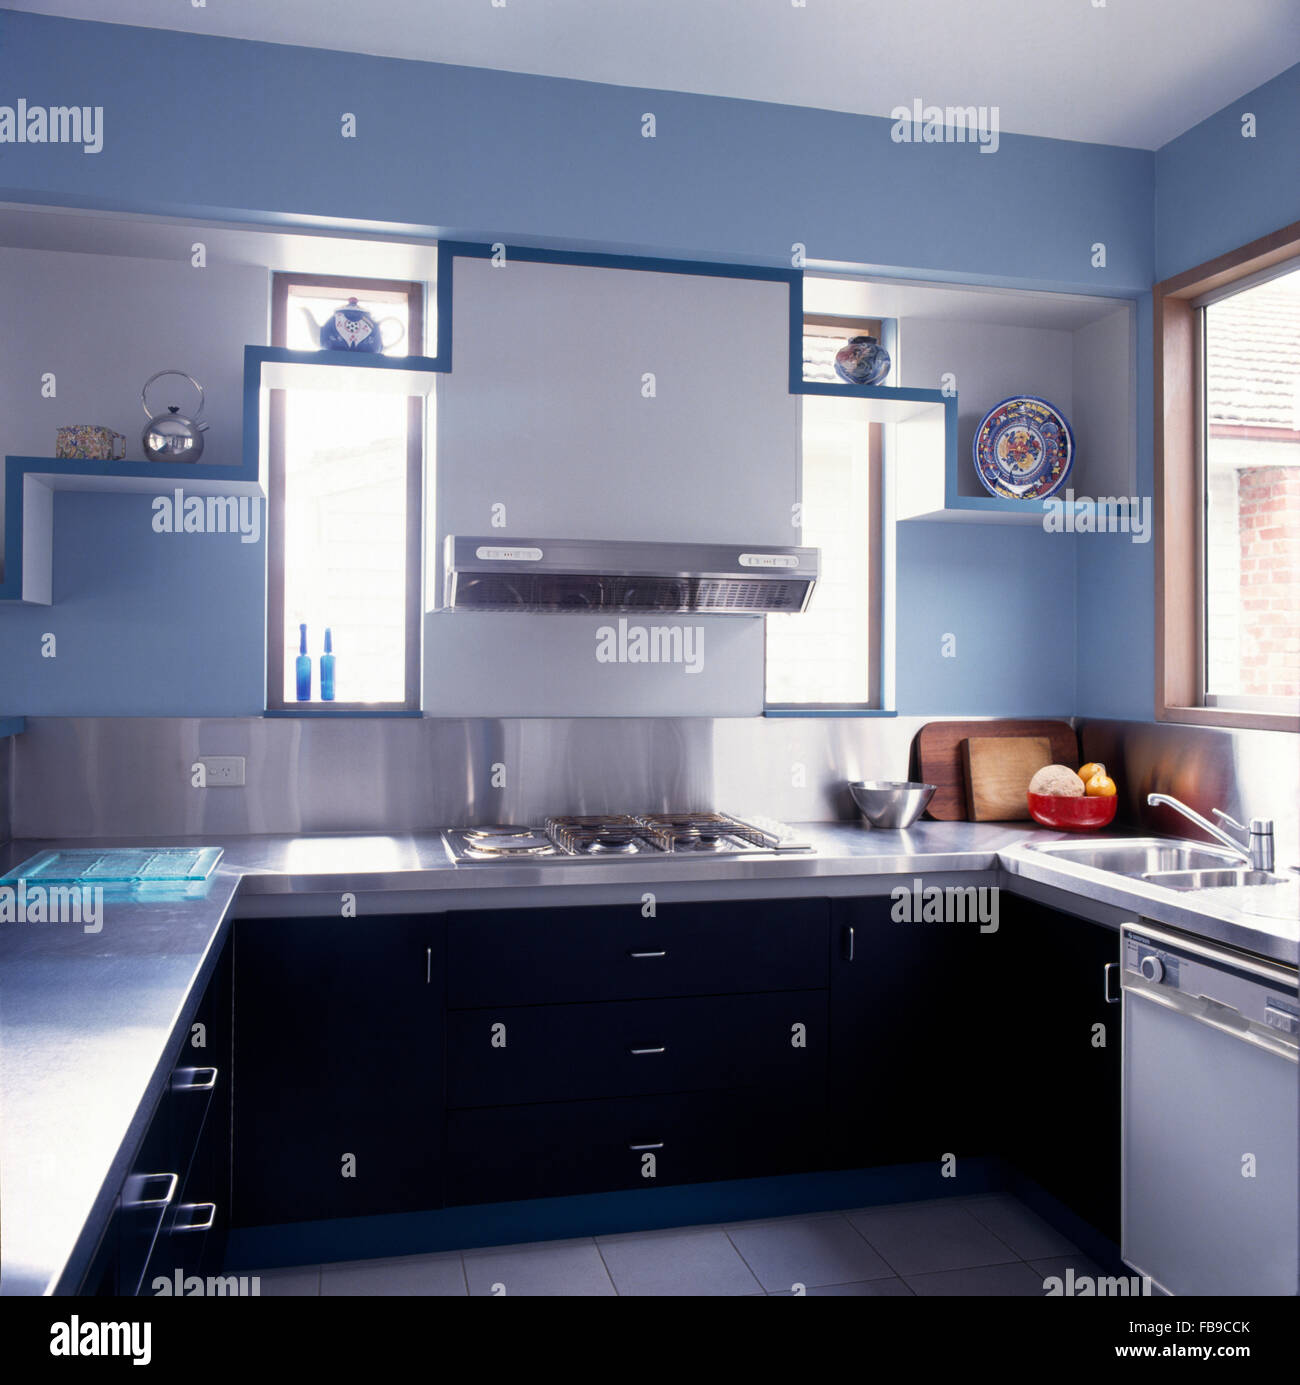 Stainless steel extractor above hob in modern blue kitchen Stock Photo